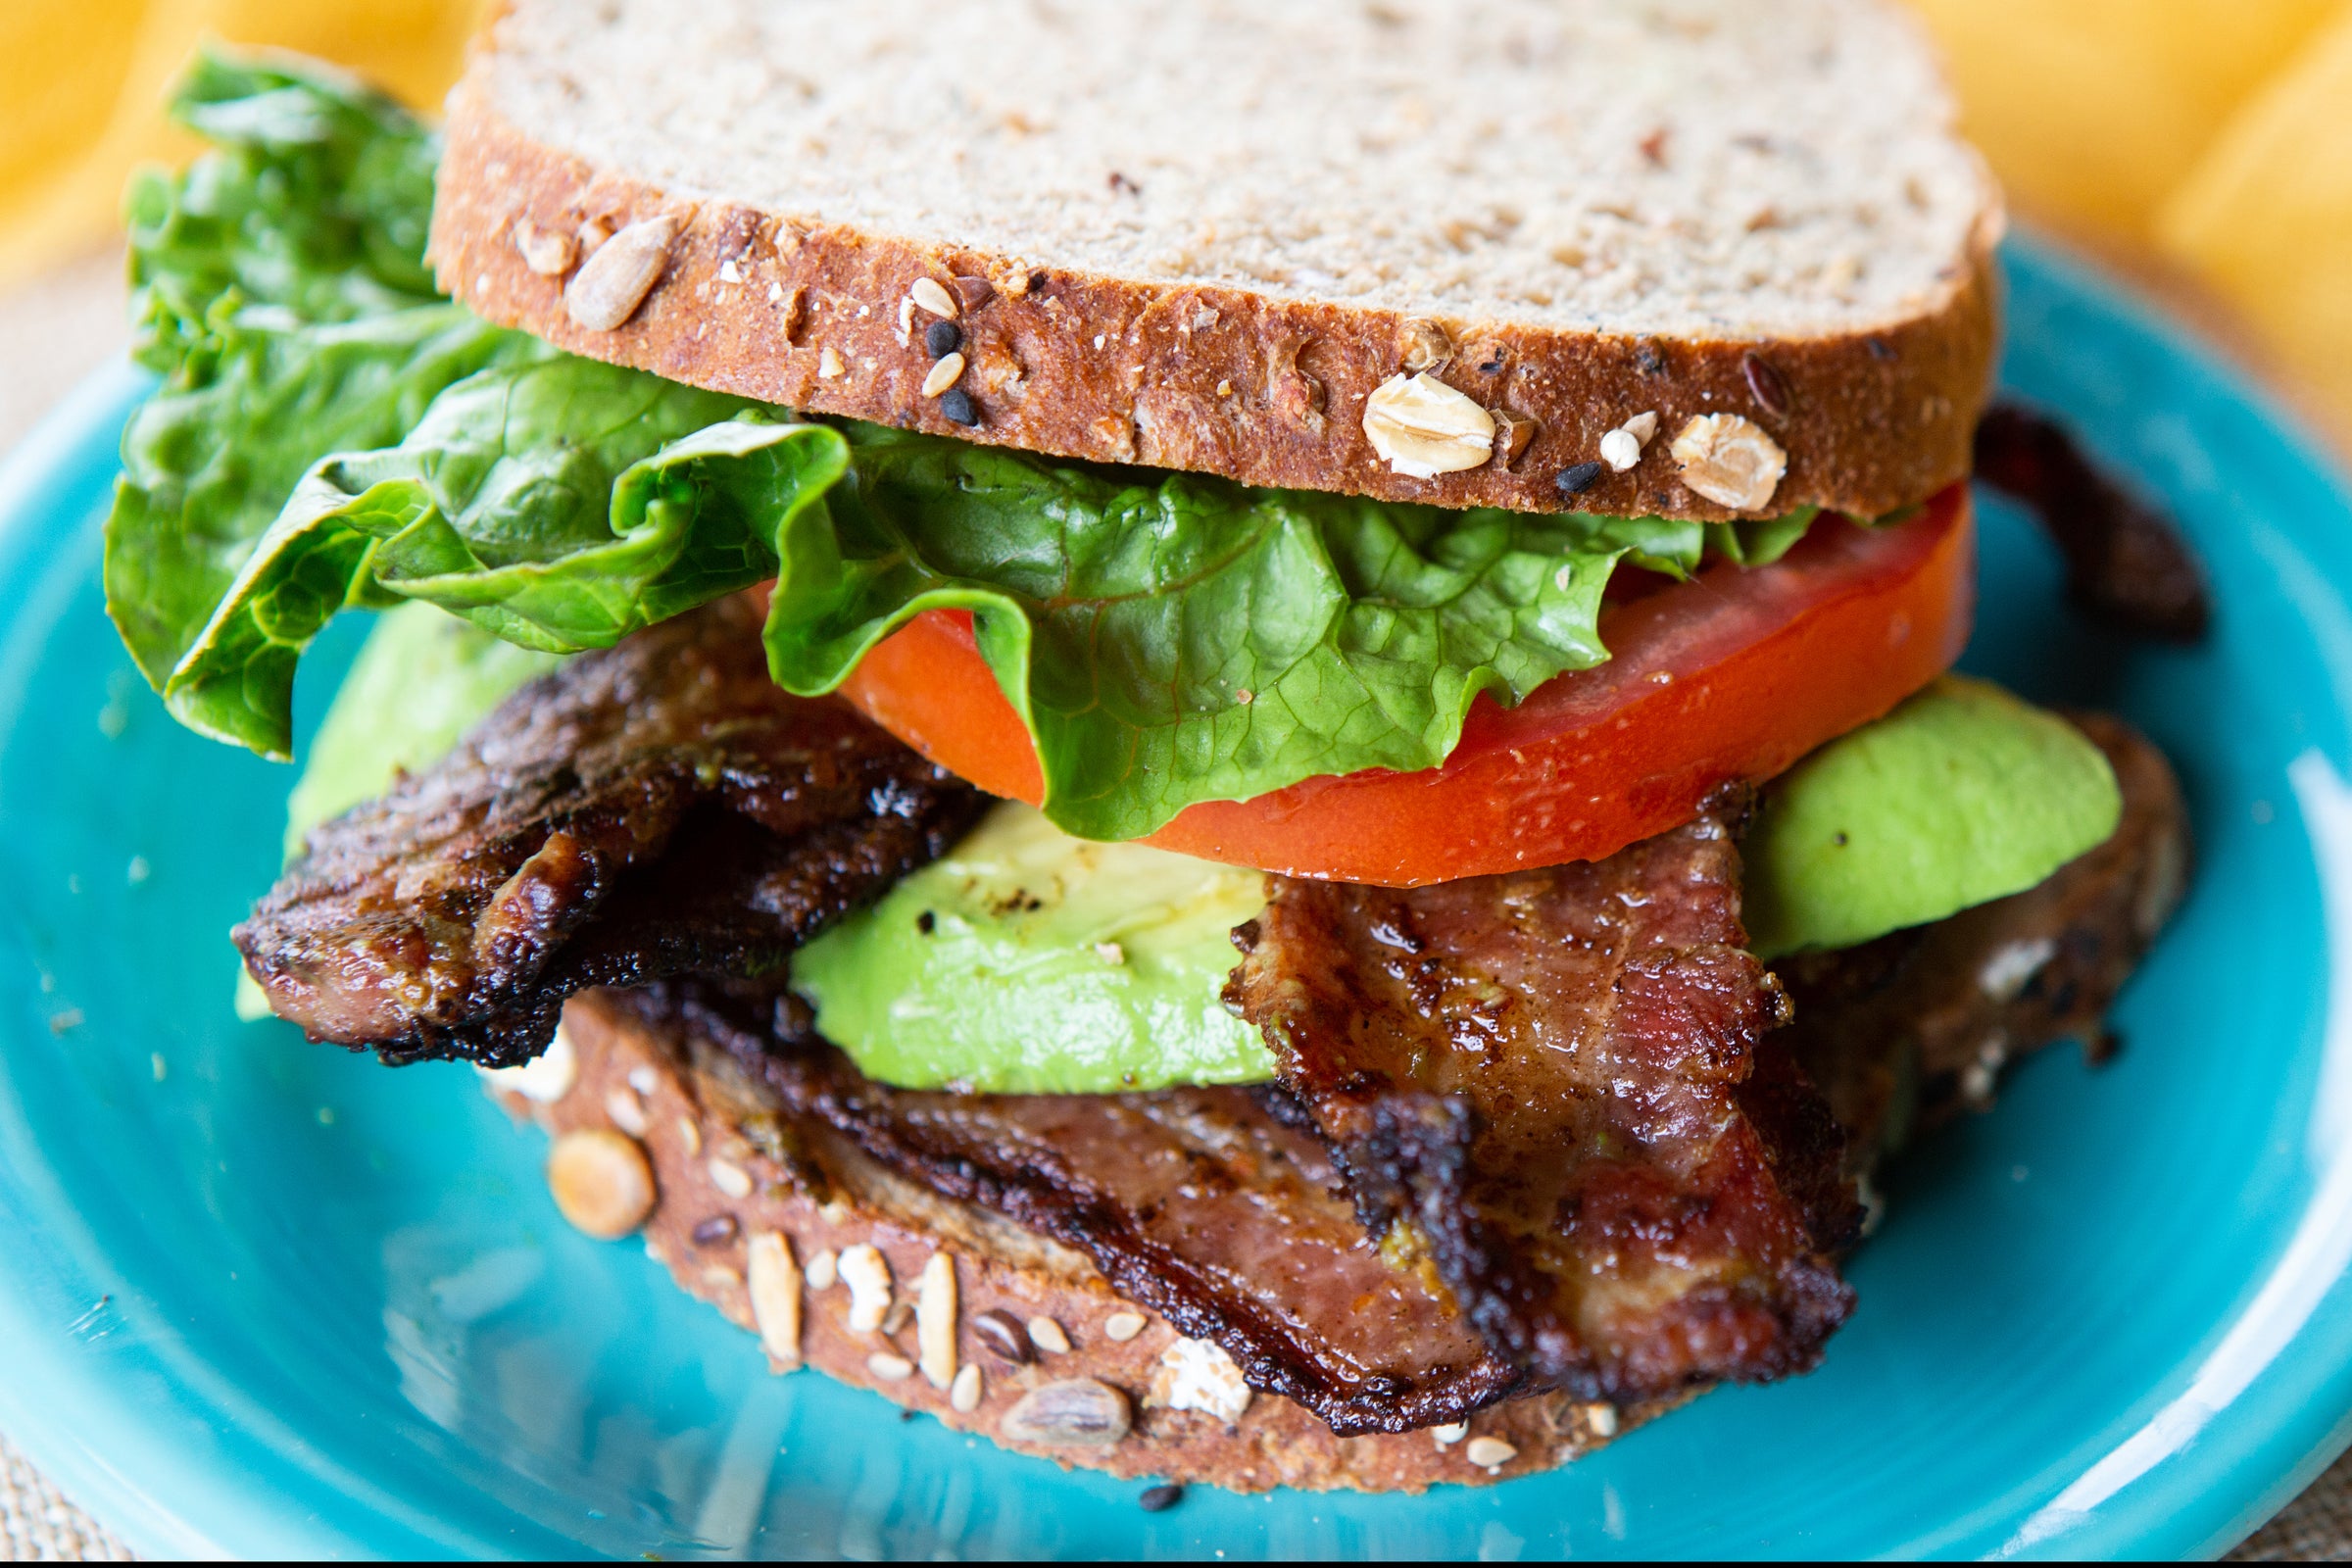 Close-up of a sandwich with whole grain bread, lettuce, tomato, avocado, Maple Leaf Farms Hatch Green Chile Bacon, and grilled meat on a blue plate.